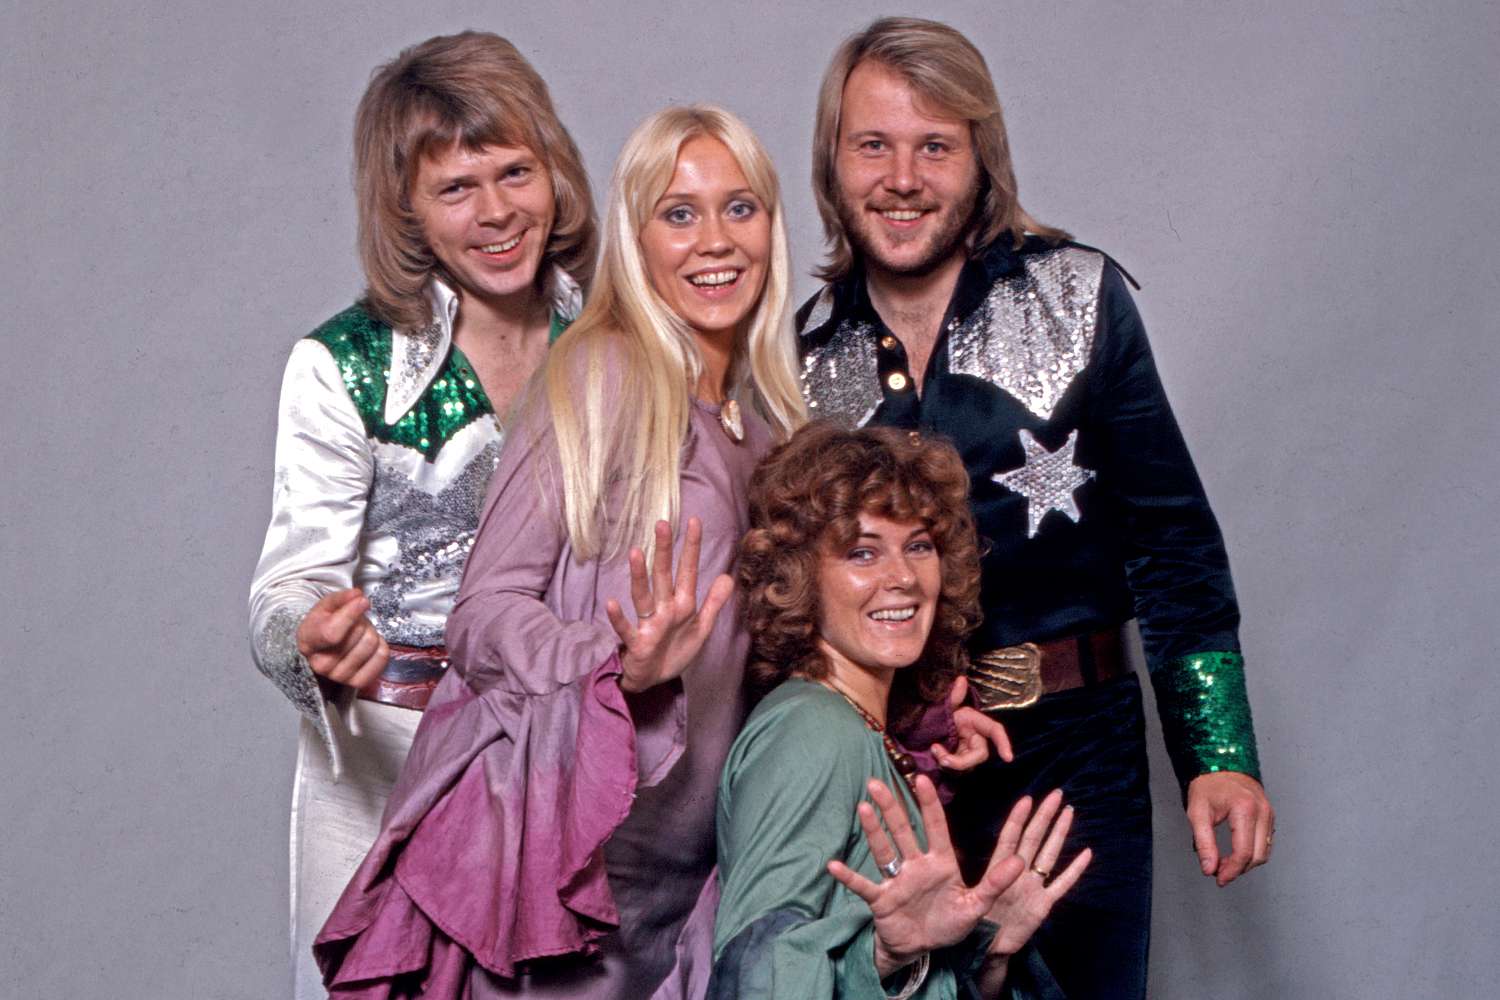 ABBA Felt They Needed to Wear 'Outrageous' Outfits to 'Be Seen' — and It Ended Up Backfiring, New Doc Reveals